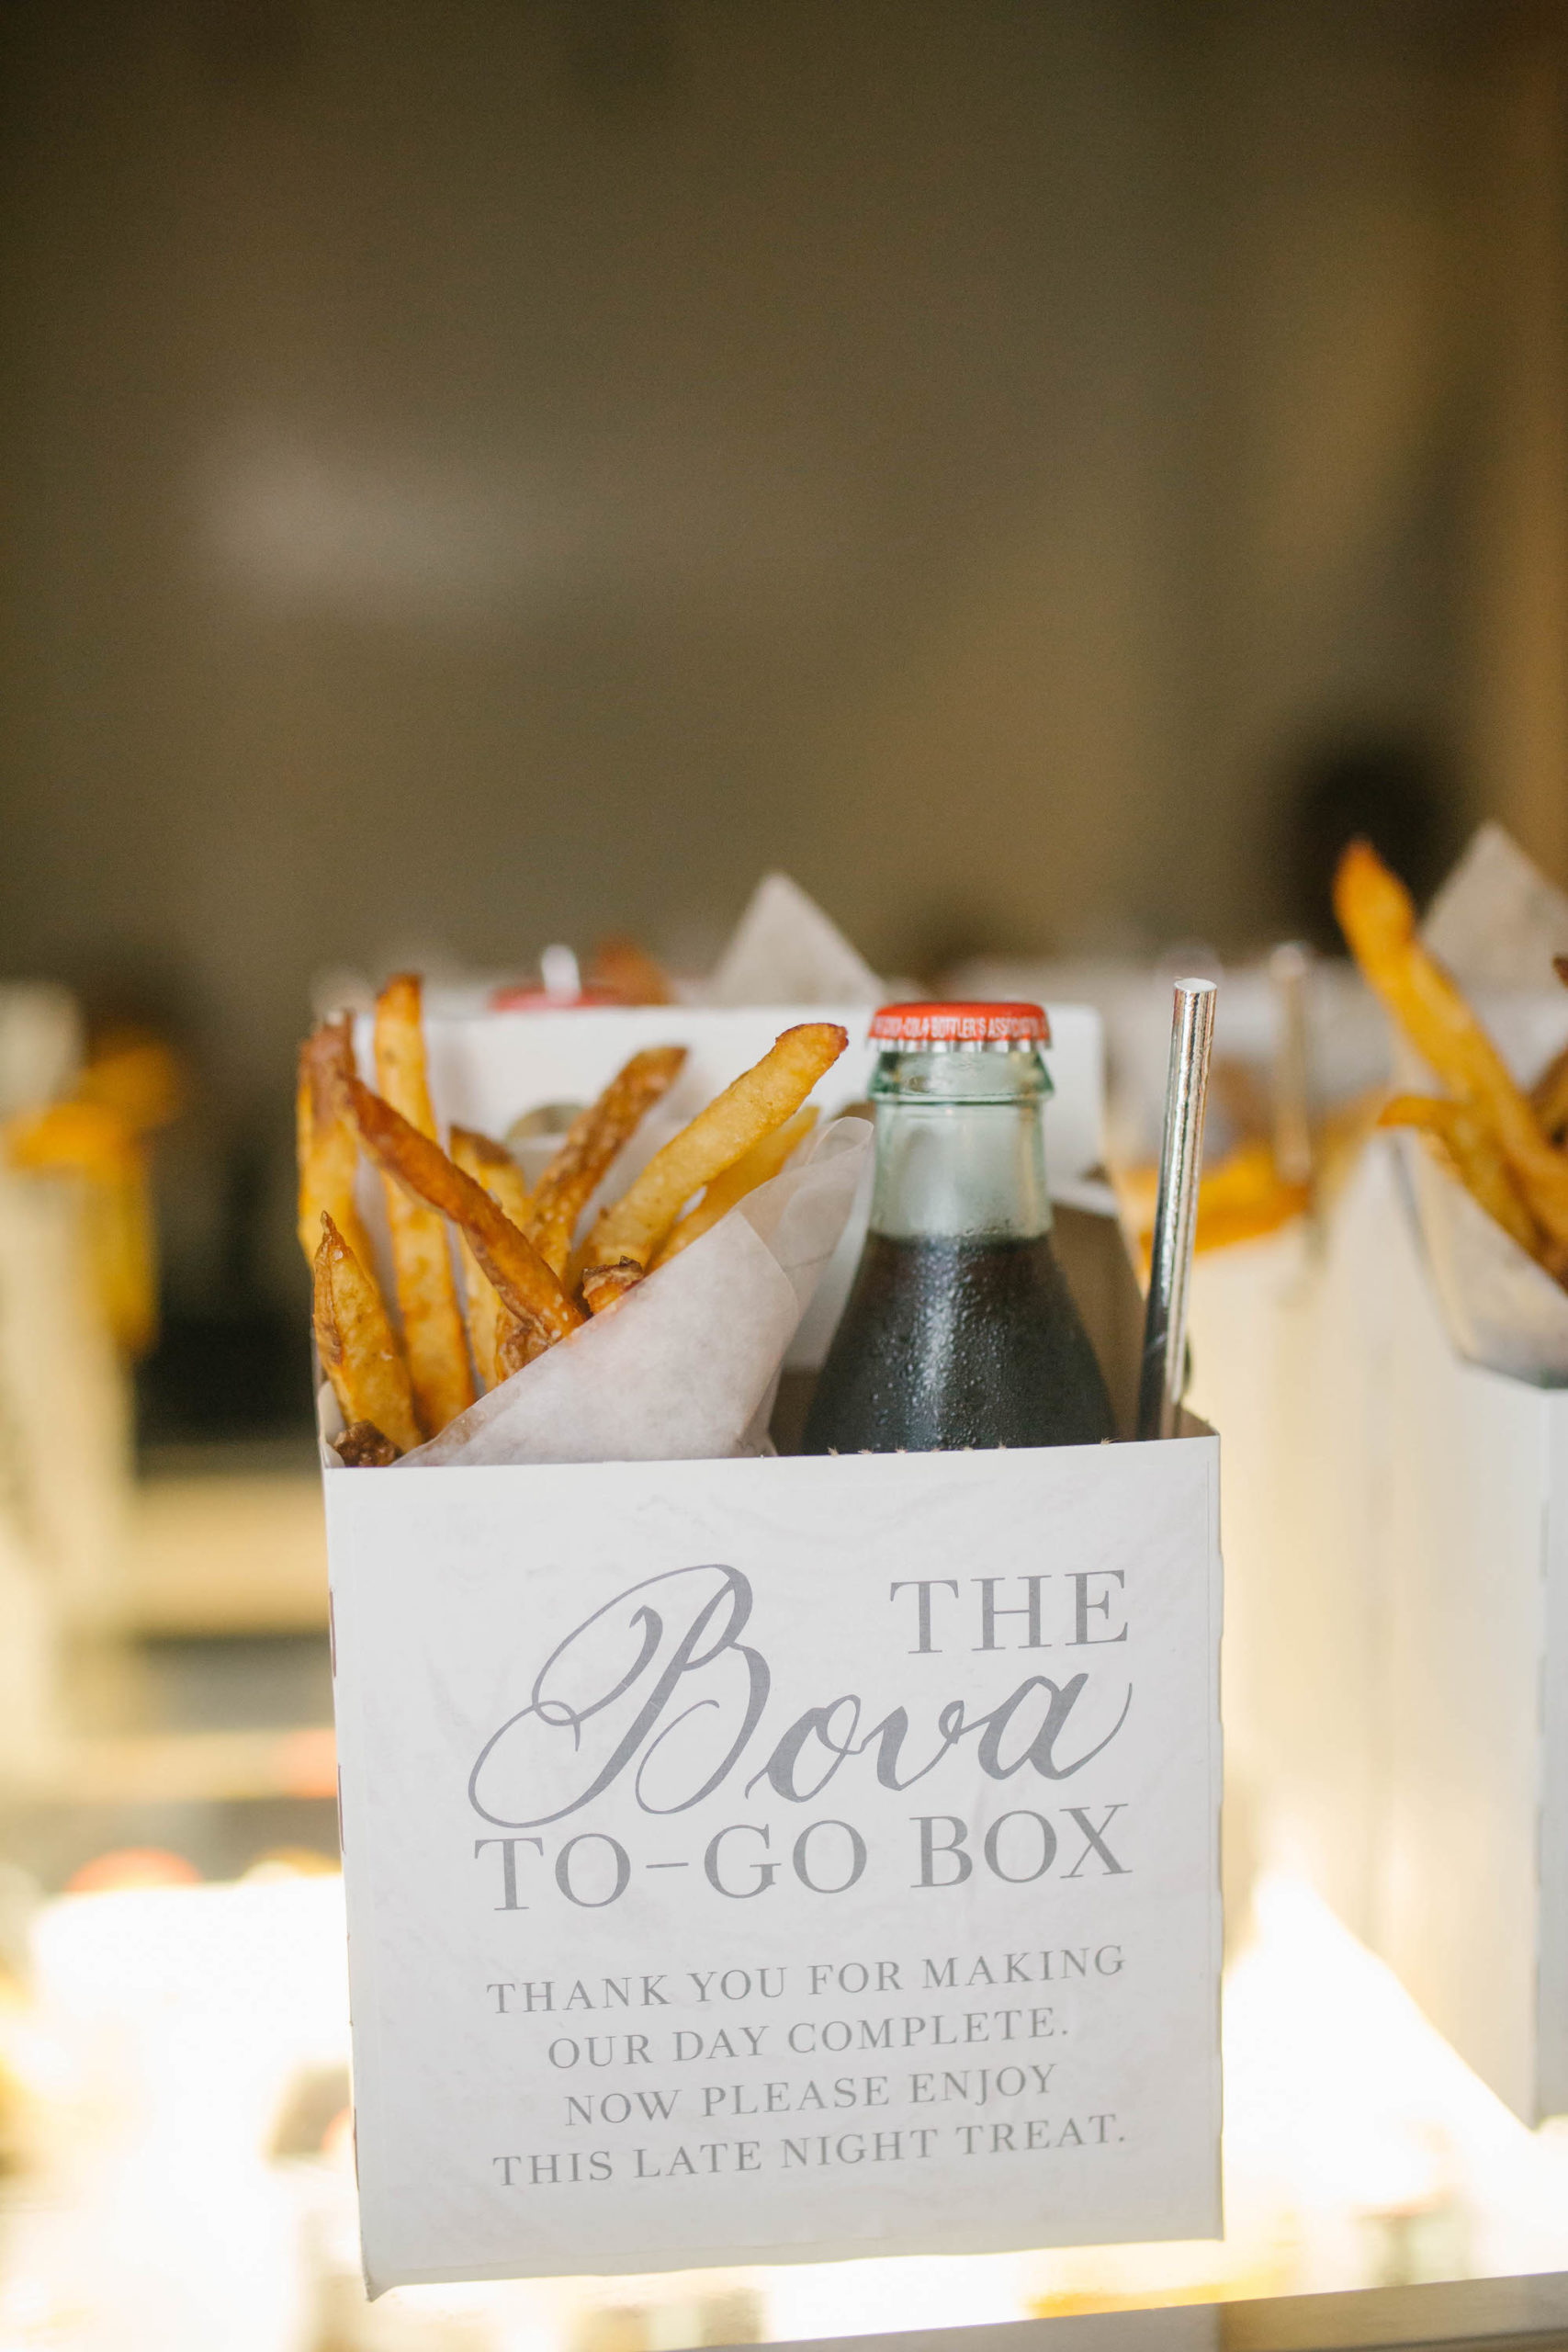 Fun Wedding Reception Favor, French Fries and Coca-Cola Bottle in Custom The Bova To-Go Box | Tampa Wedding Planner Parties A'la Carte